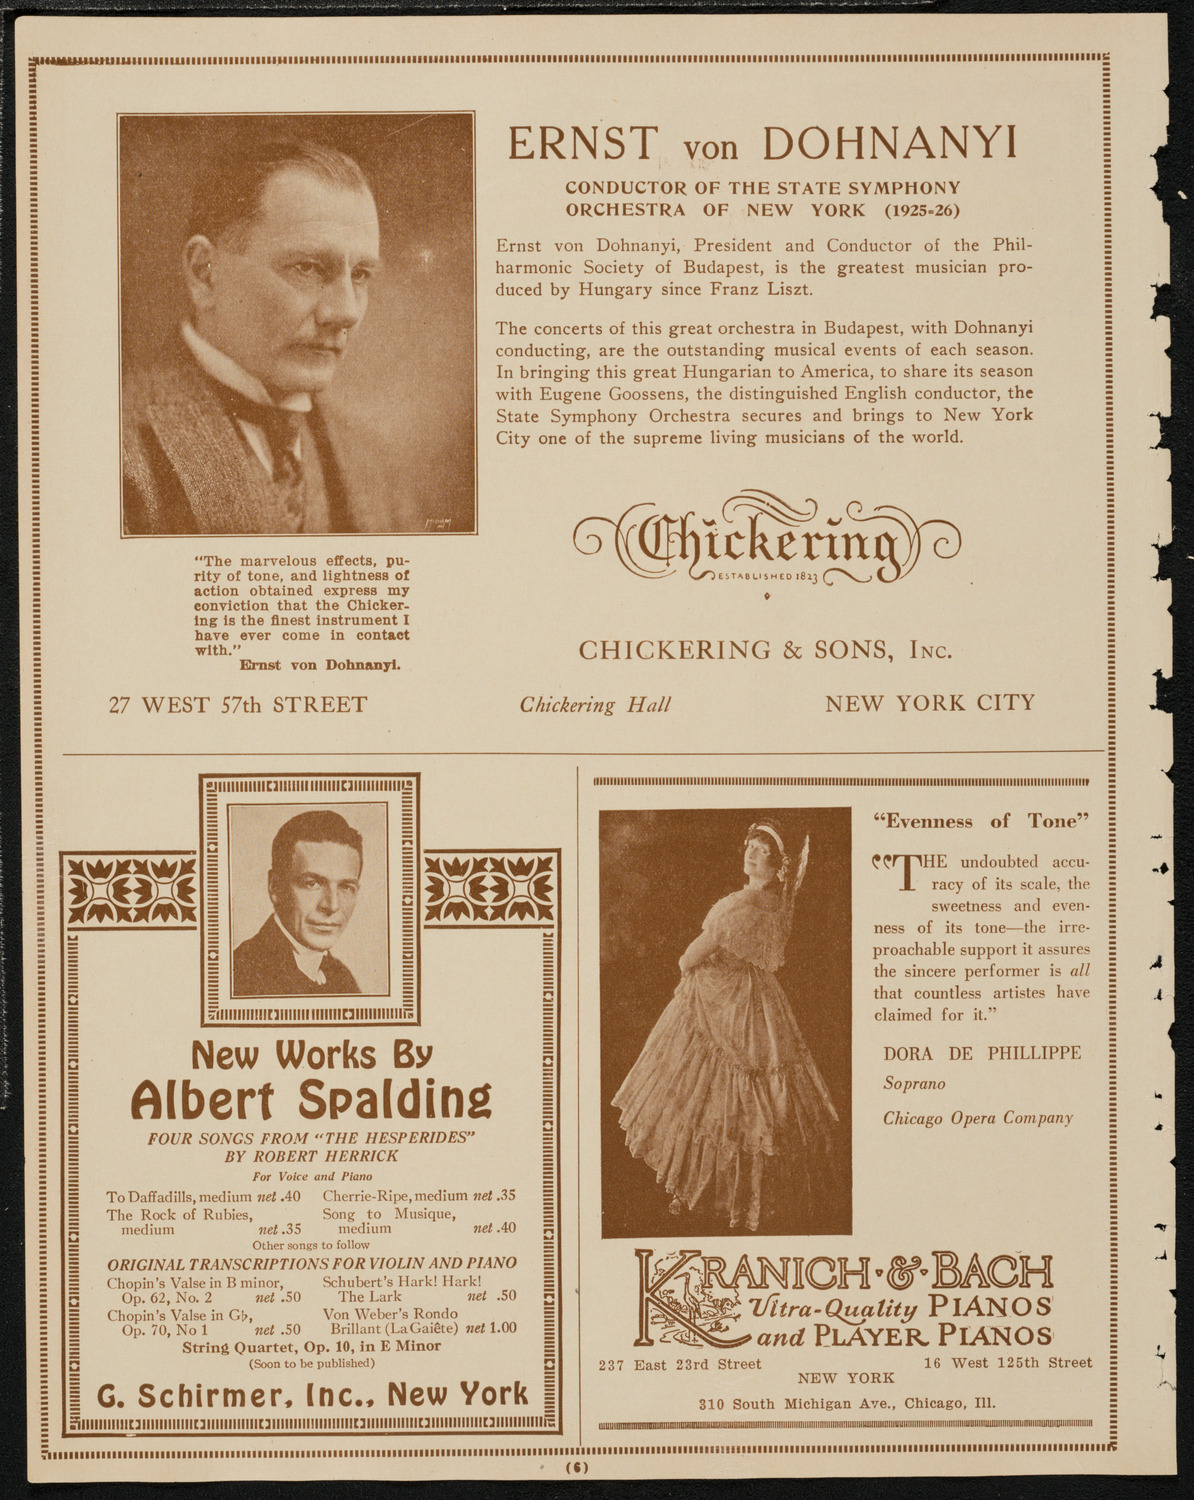 May Day Festival, May 1, 1925, program page 6